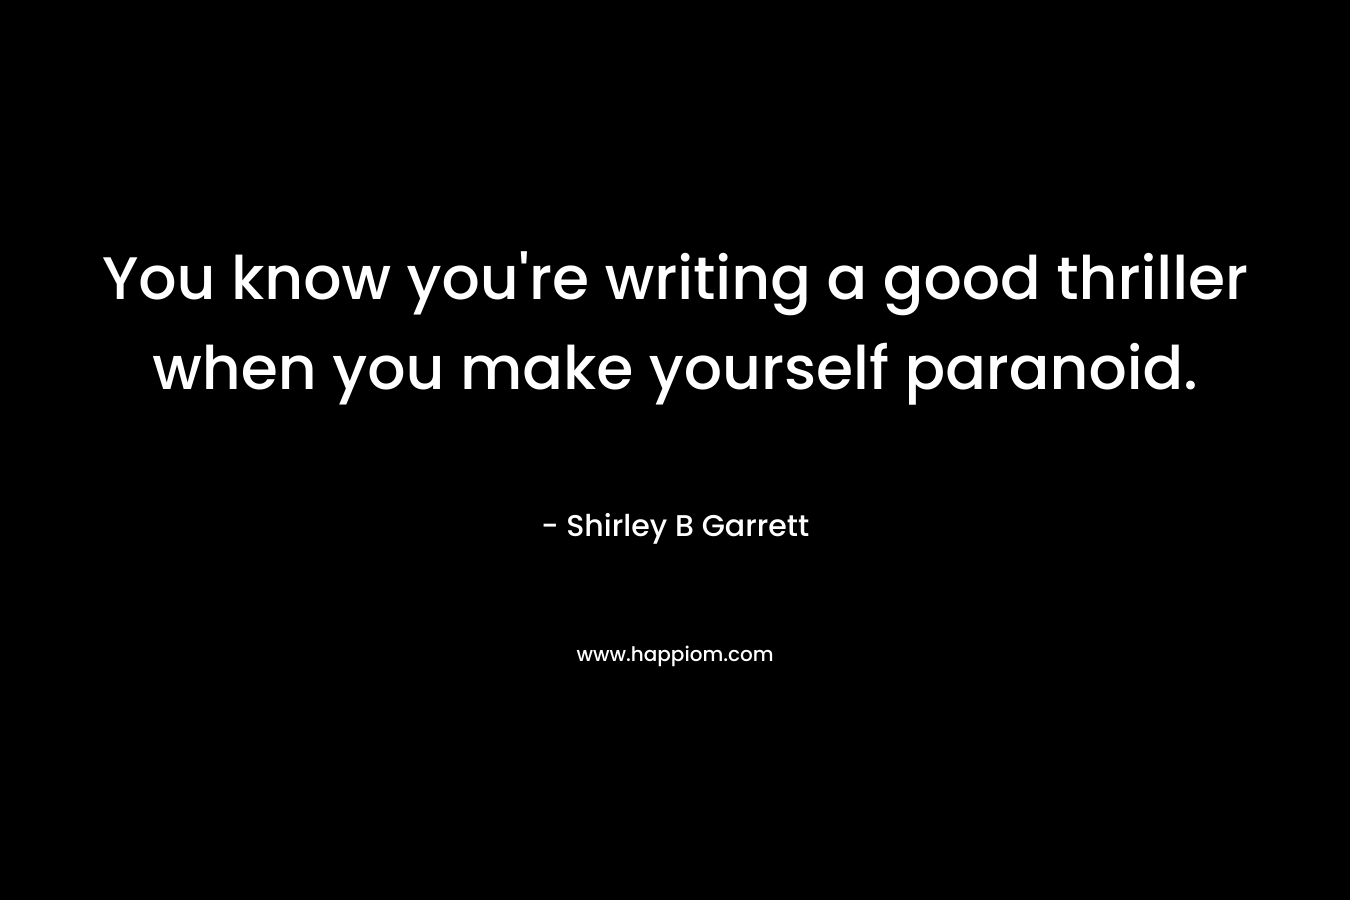 You know you’re writing a good thriller when you make yourself paranoid. – Shirley B Garrett